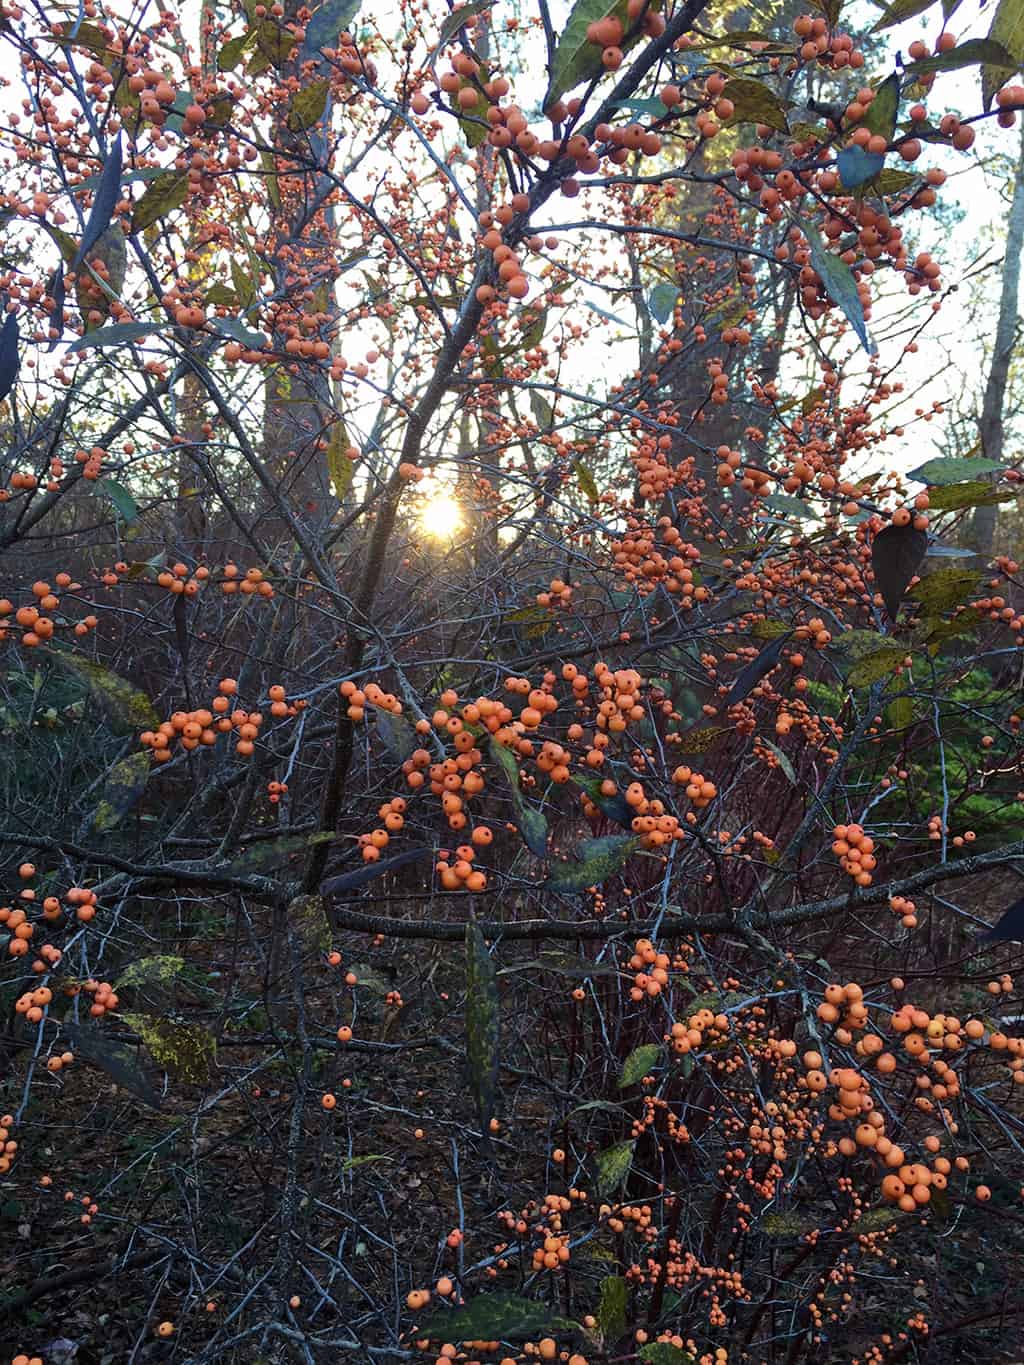 The berries of 'Winter Gold' are actually peach in color. Love it...